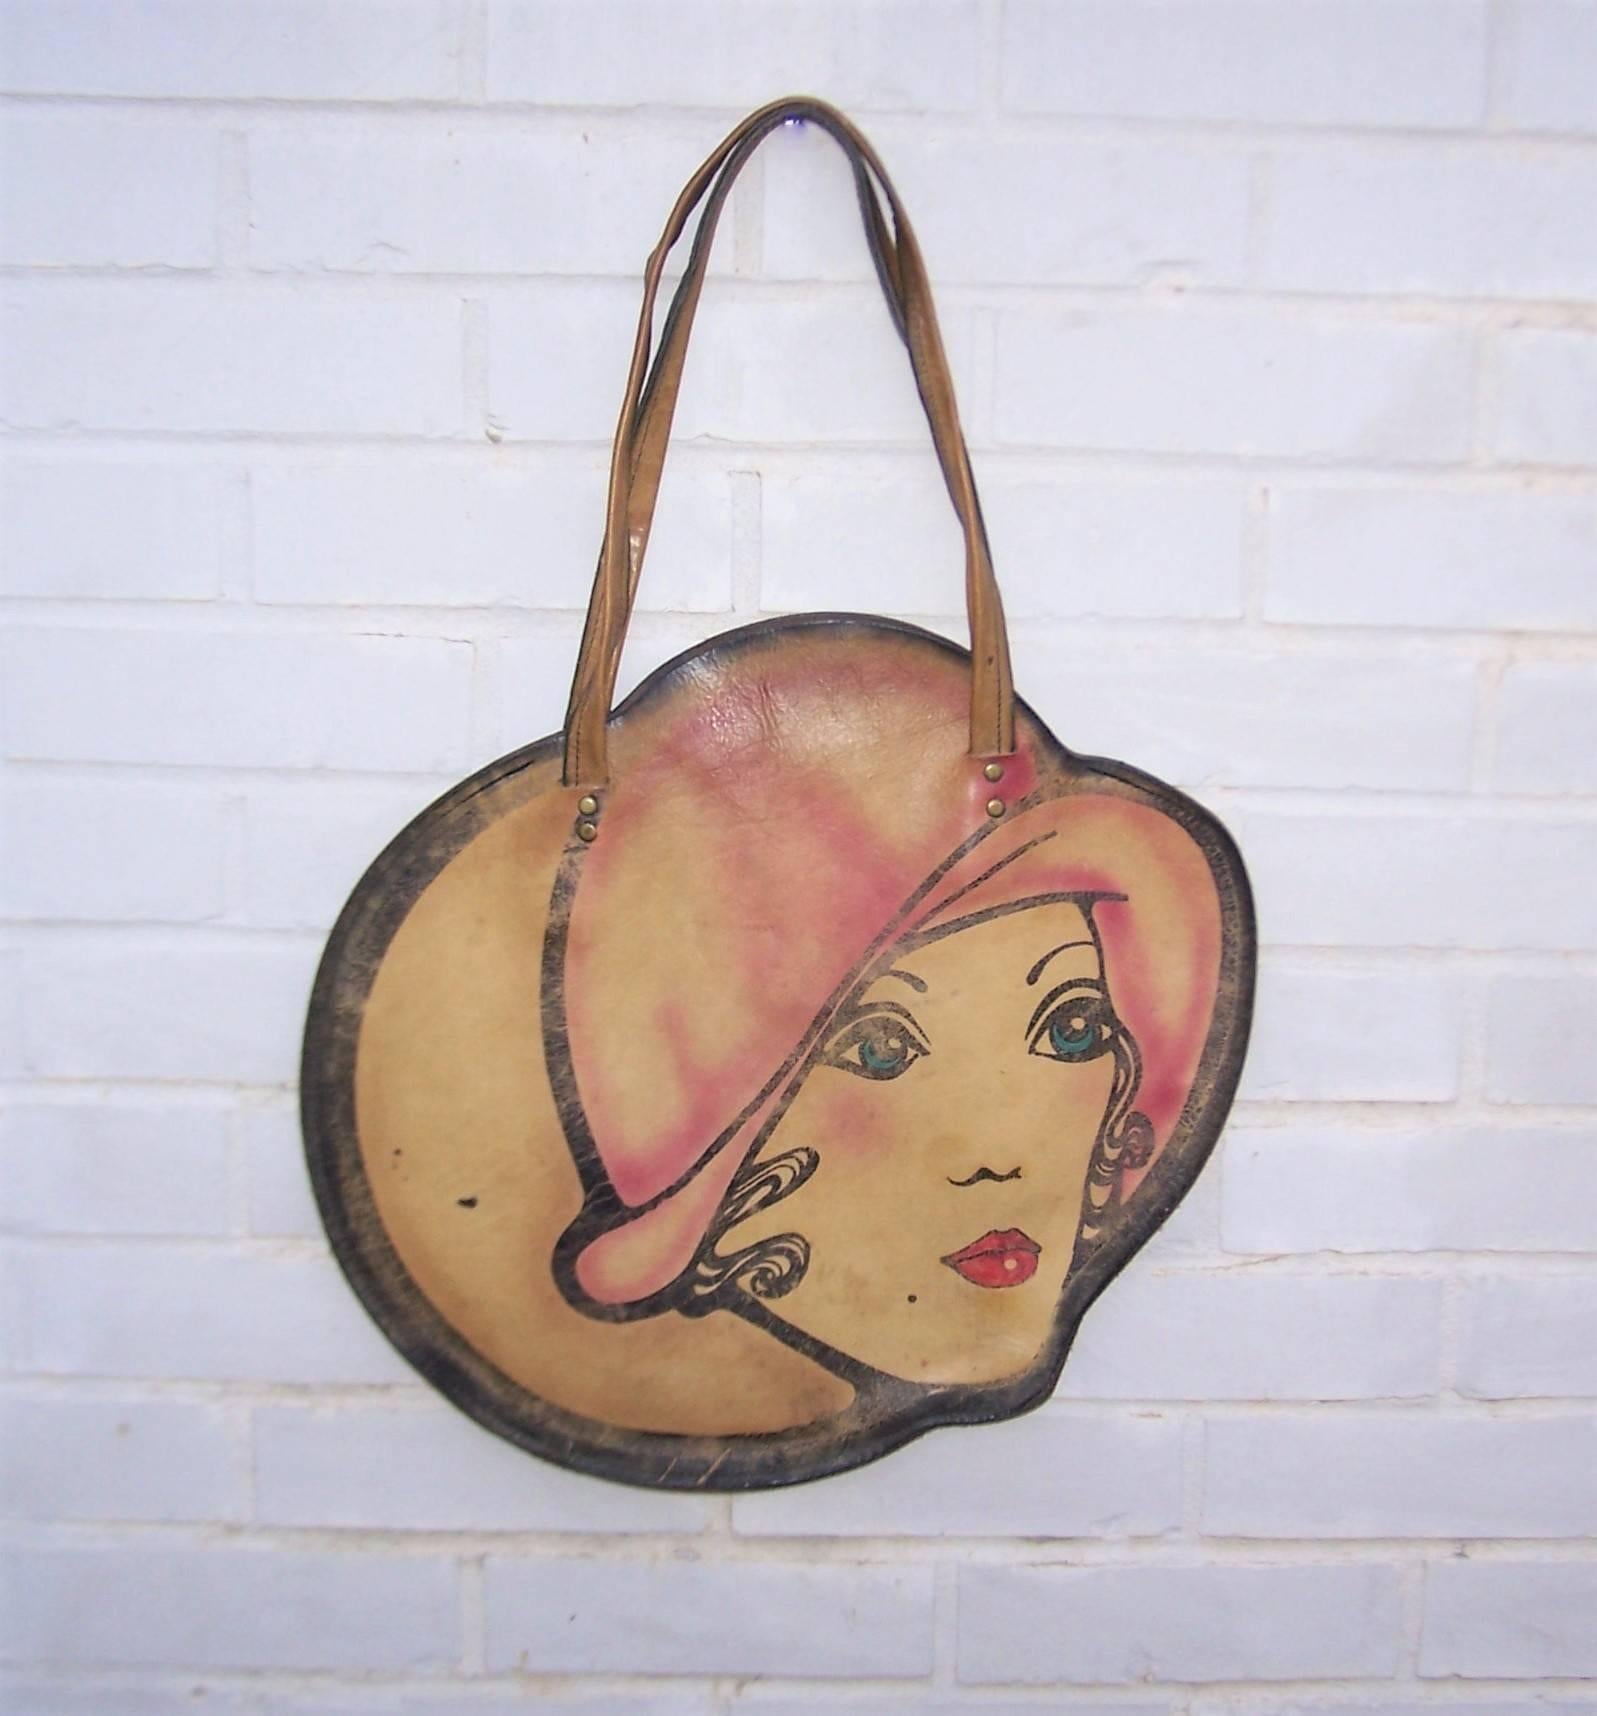 Oh you pretty things!  This bohemian handbag looks like it would fit right into the mod scene of swinging 1960's London boutiques such as Biba.  The hand painted front side of the leather silhouette pictures a lovely flapper girl in soft shades of